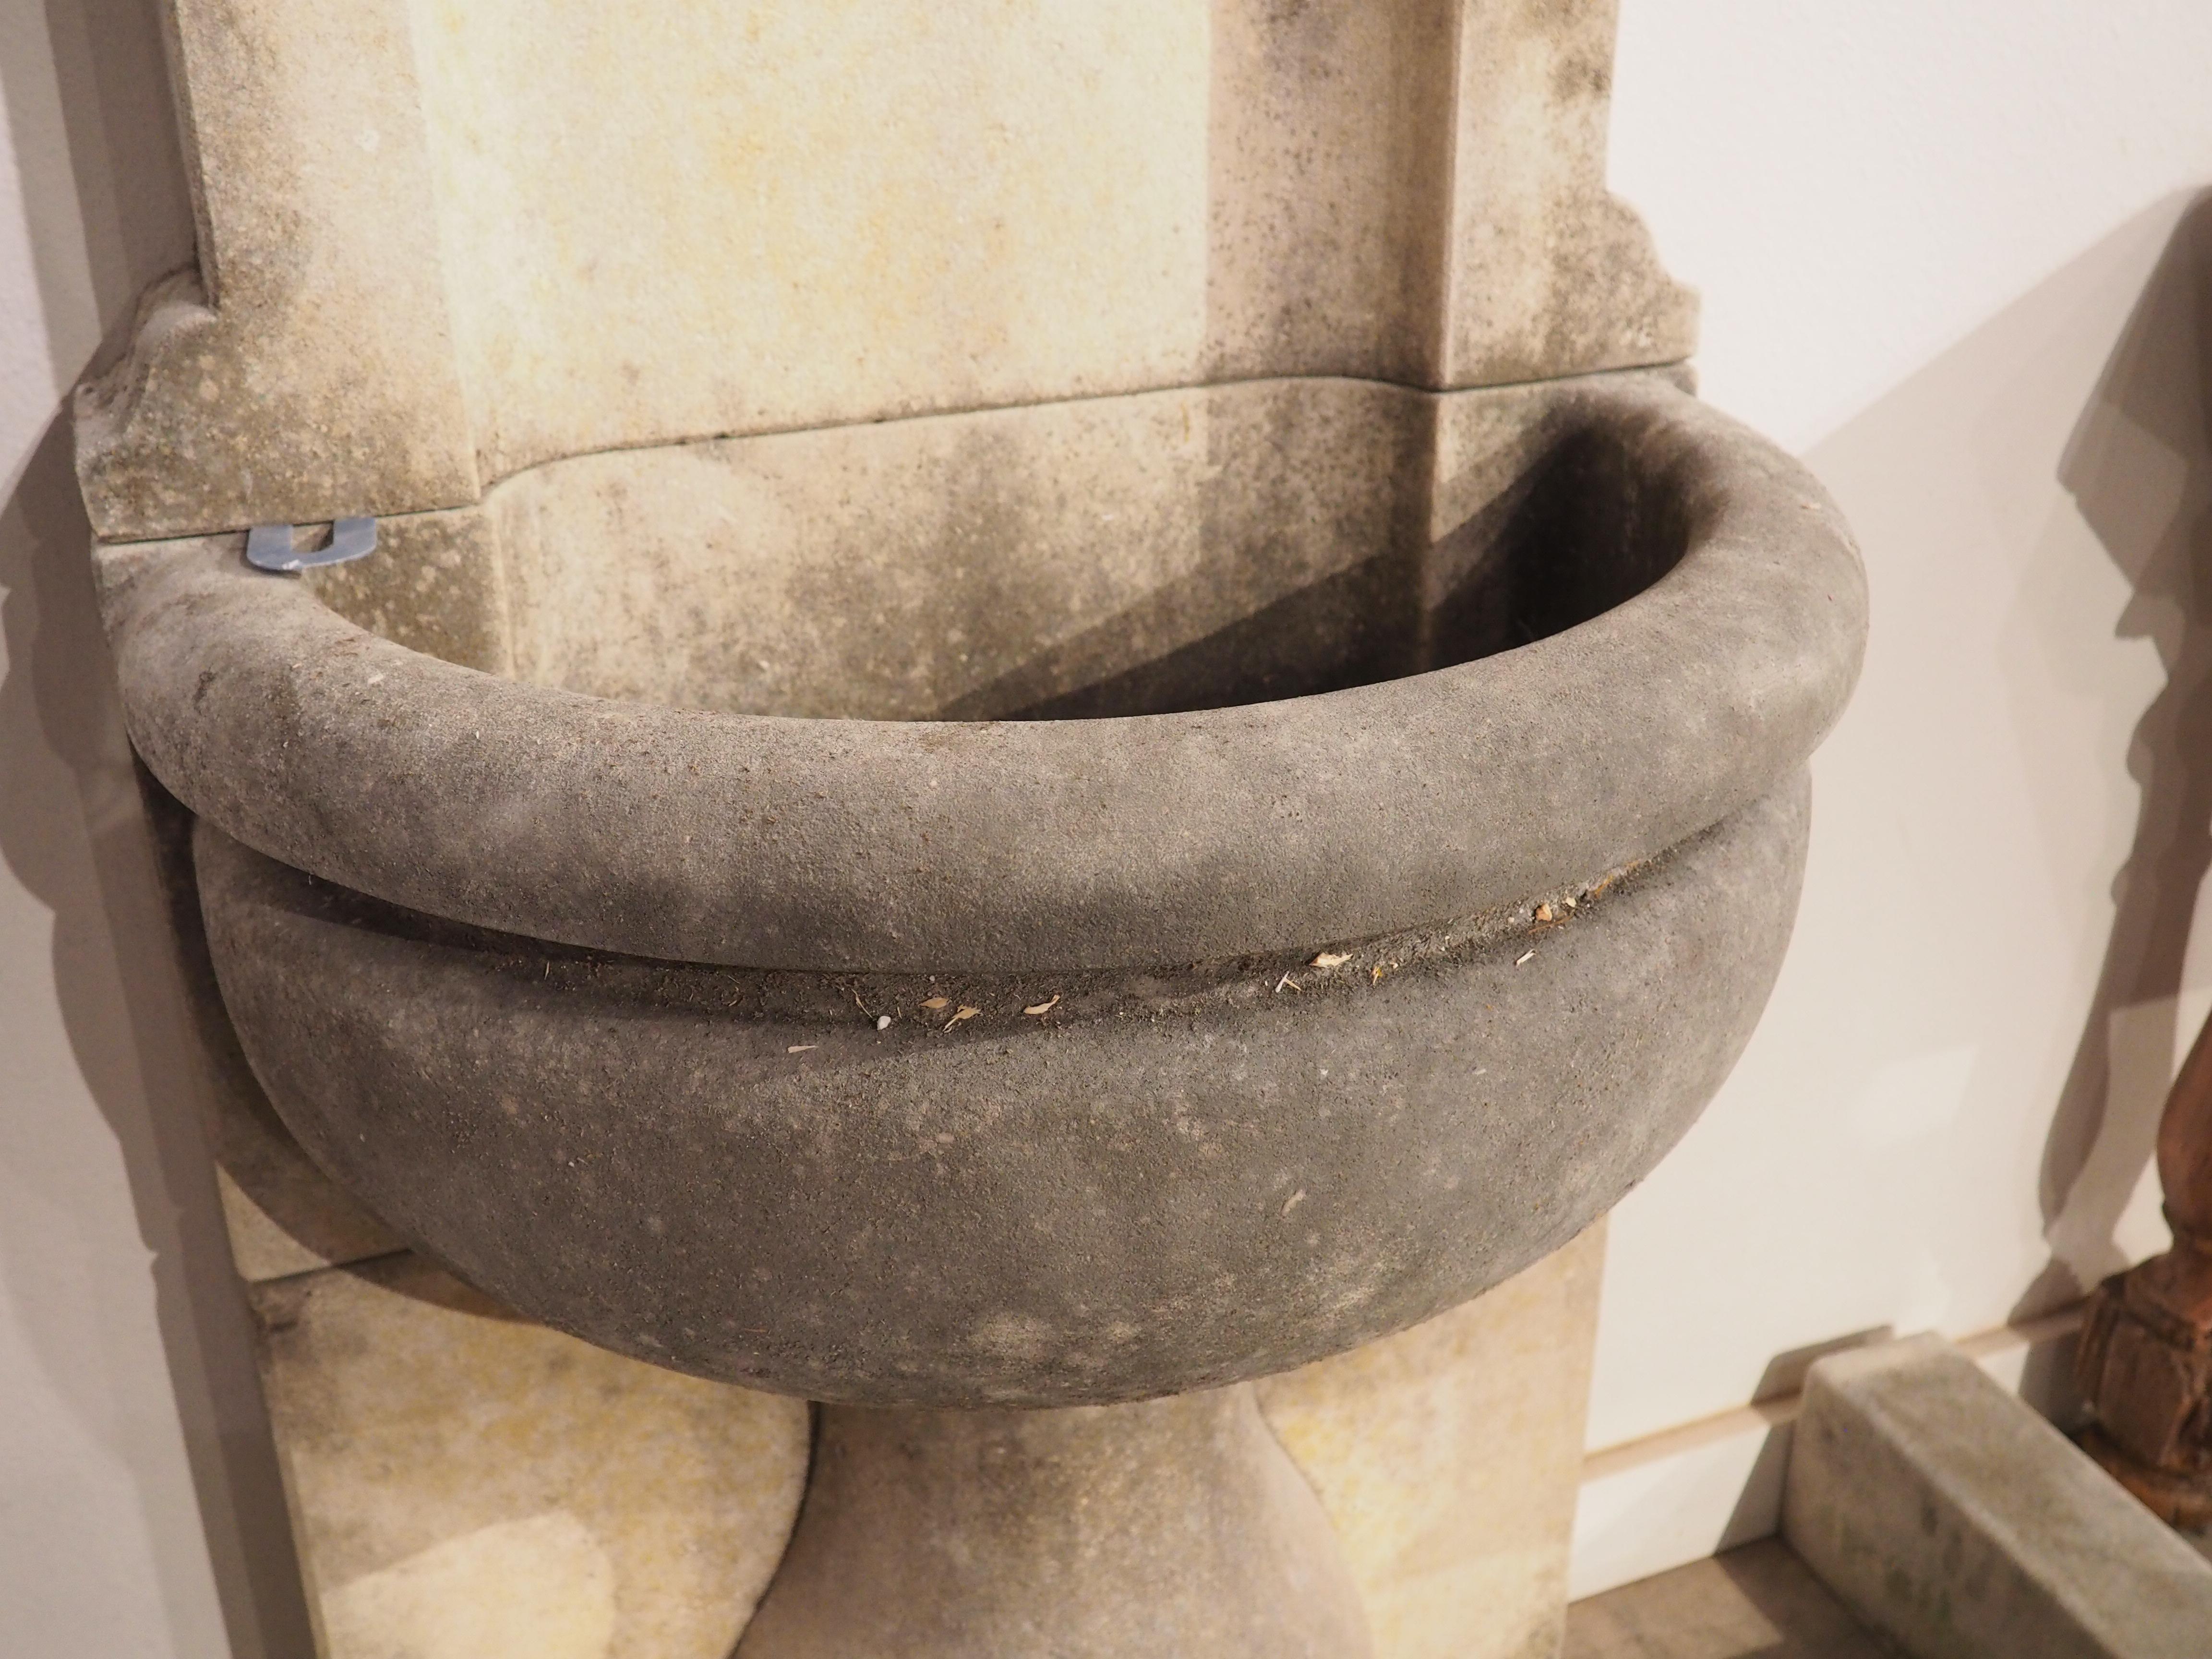 Consisting of seven pieces of Vicenza limestone, this wall fountain with surround was hand-carved in Veneto, Italy. The fountain is comprised of four blocks of stone, each with a warm, natural patina. At the foot of the fountain is a three-piece